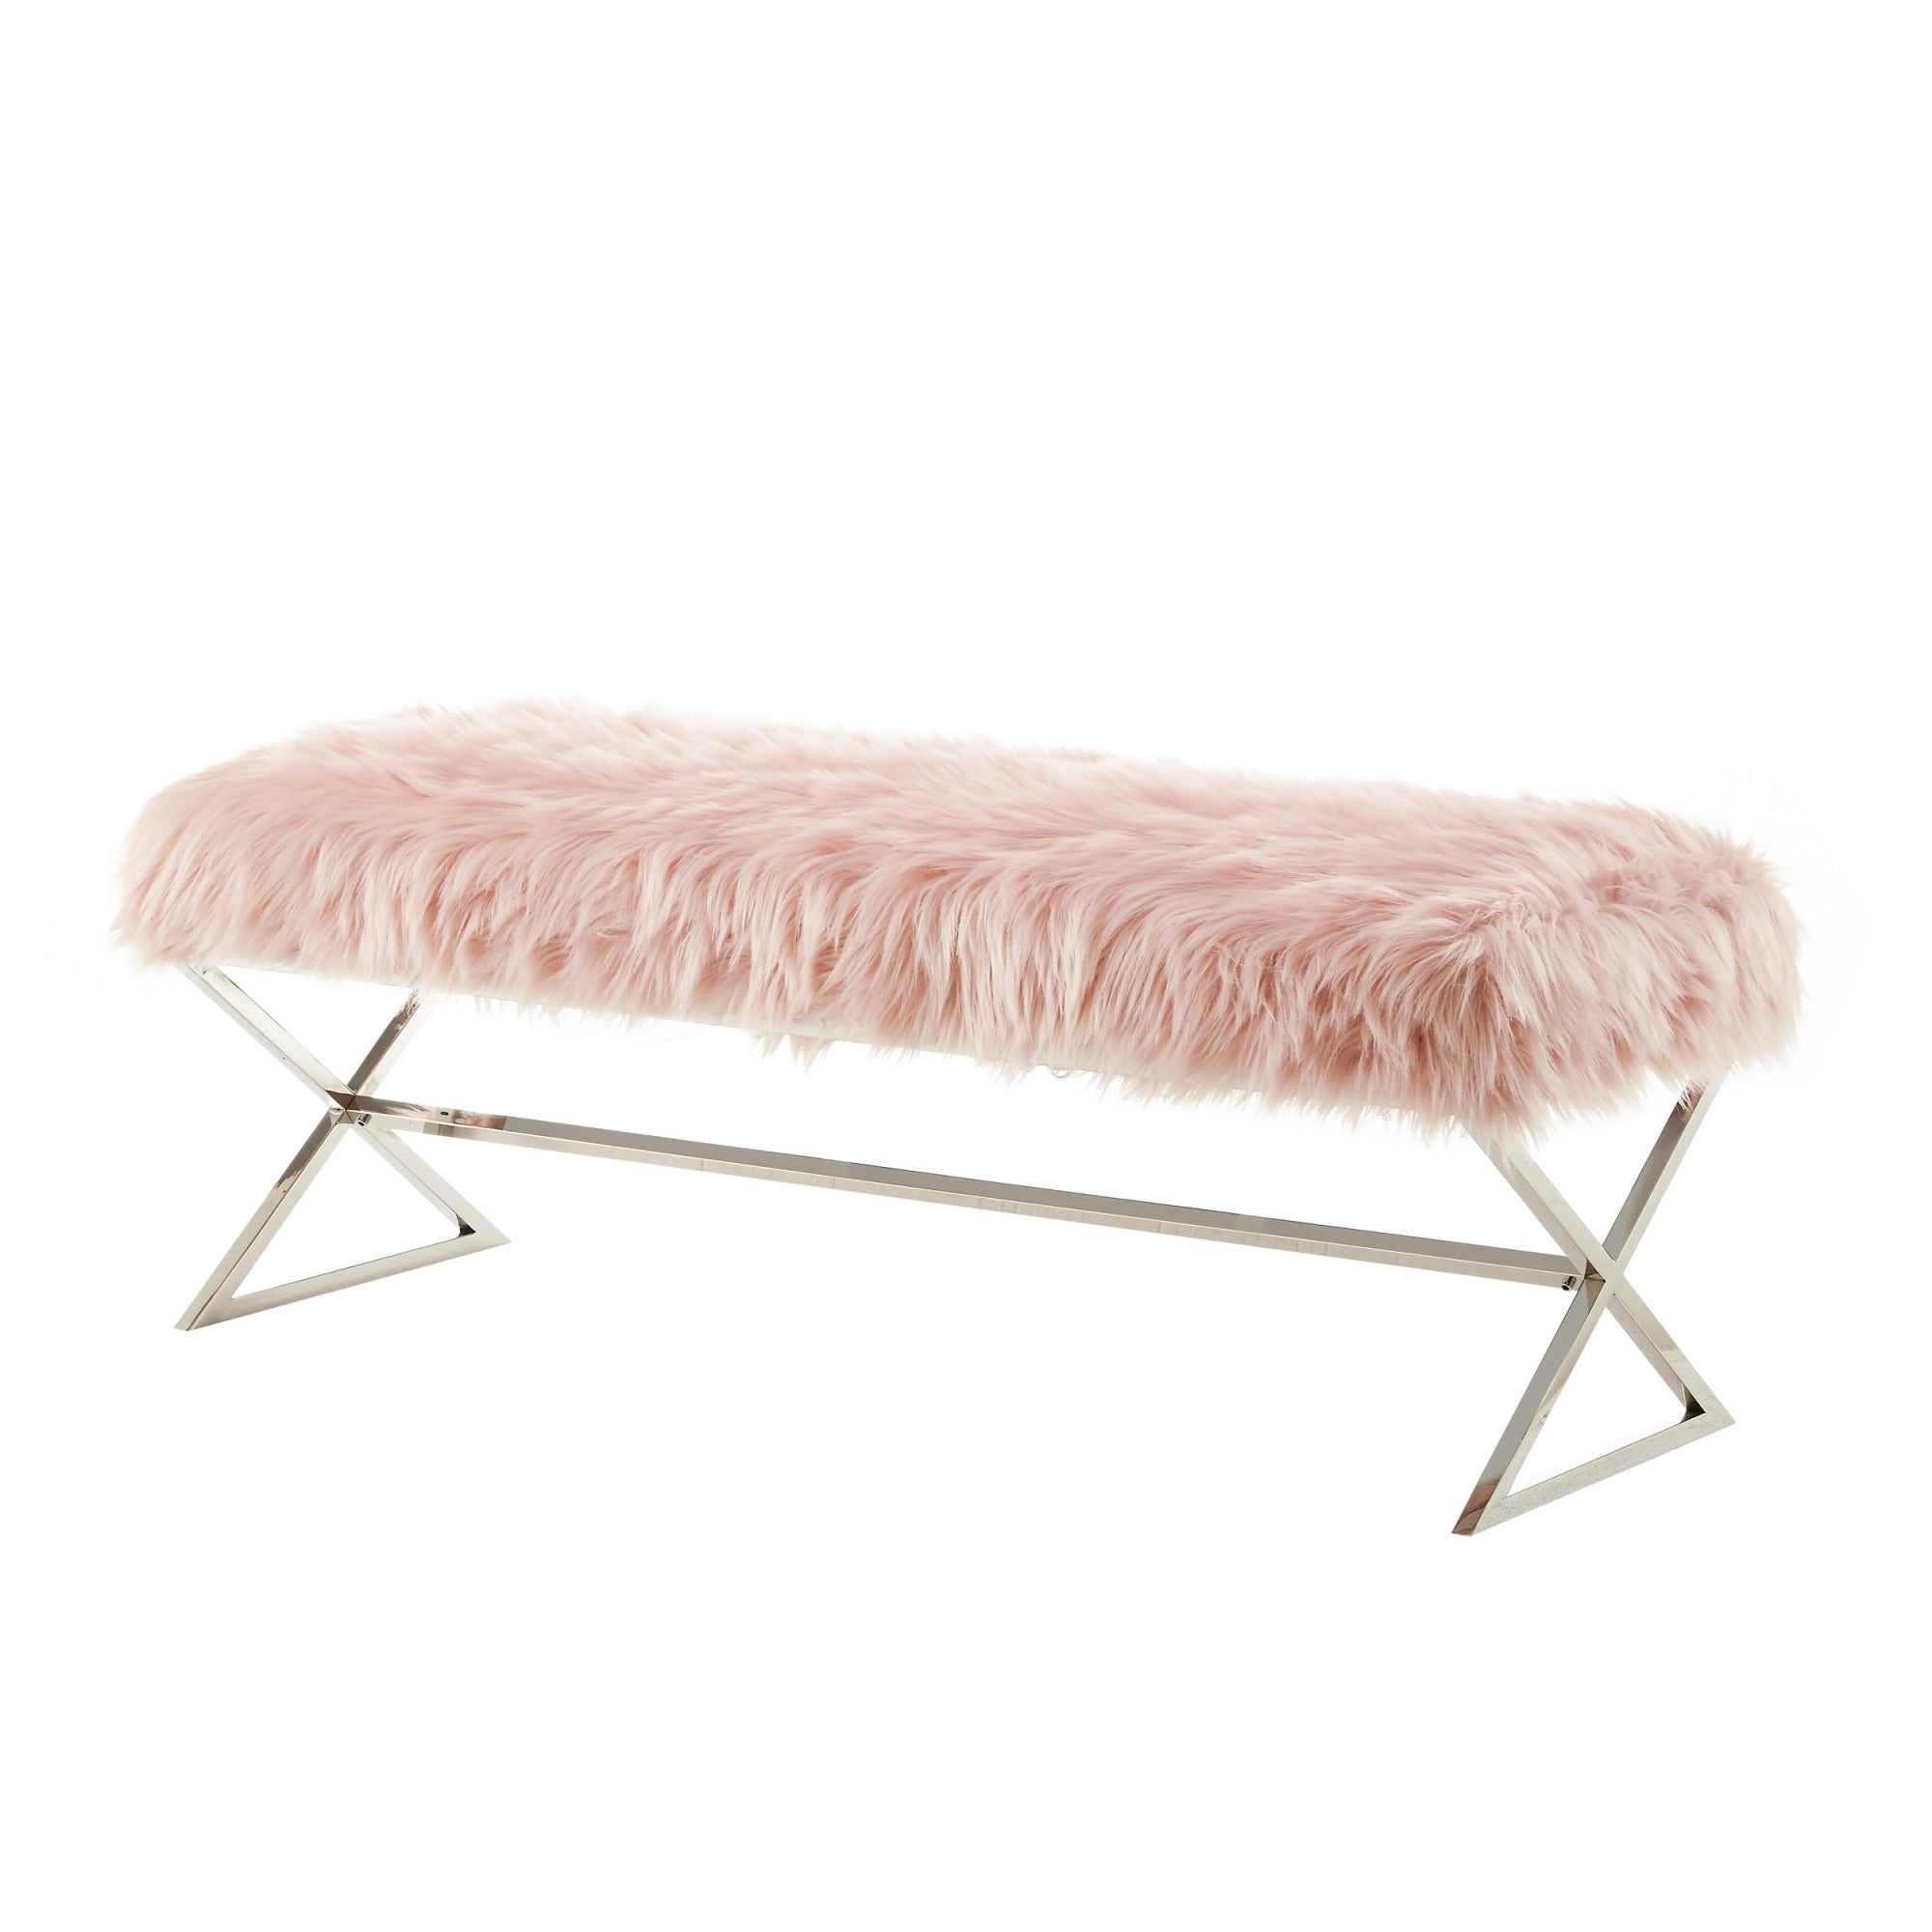 48" Gray And Silver Upholstered Faux Fur Bench